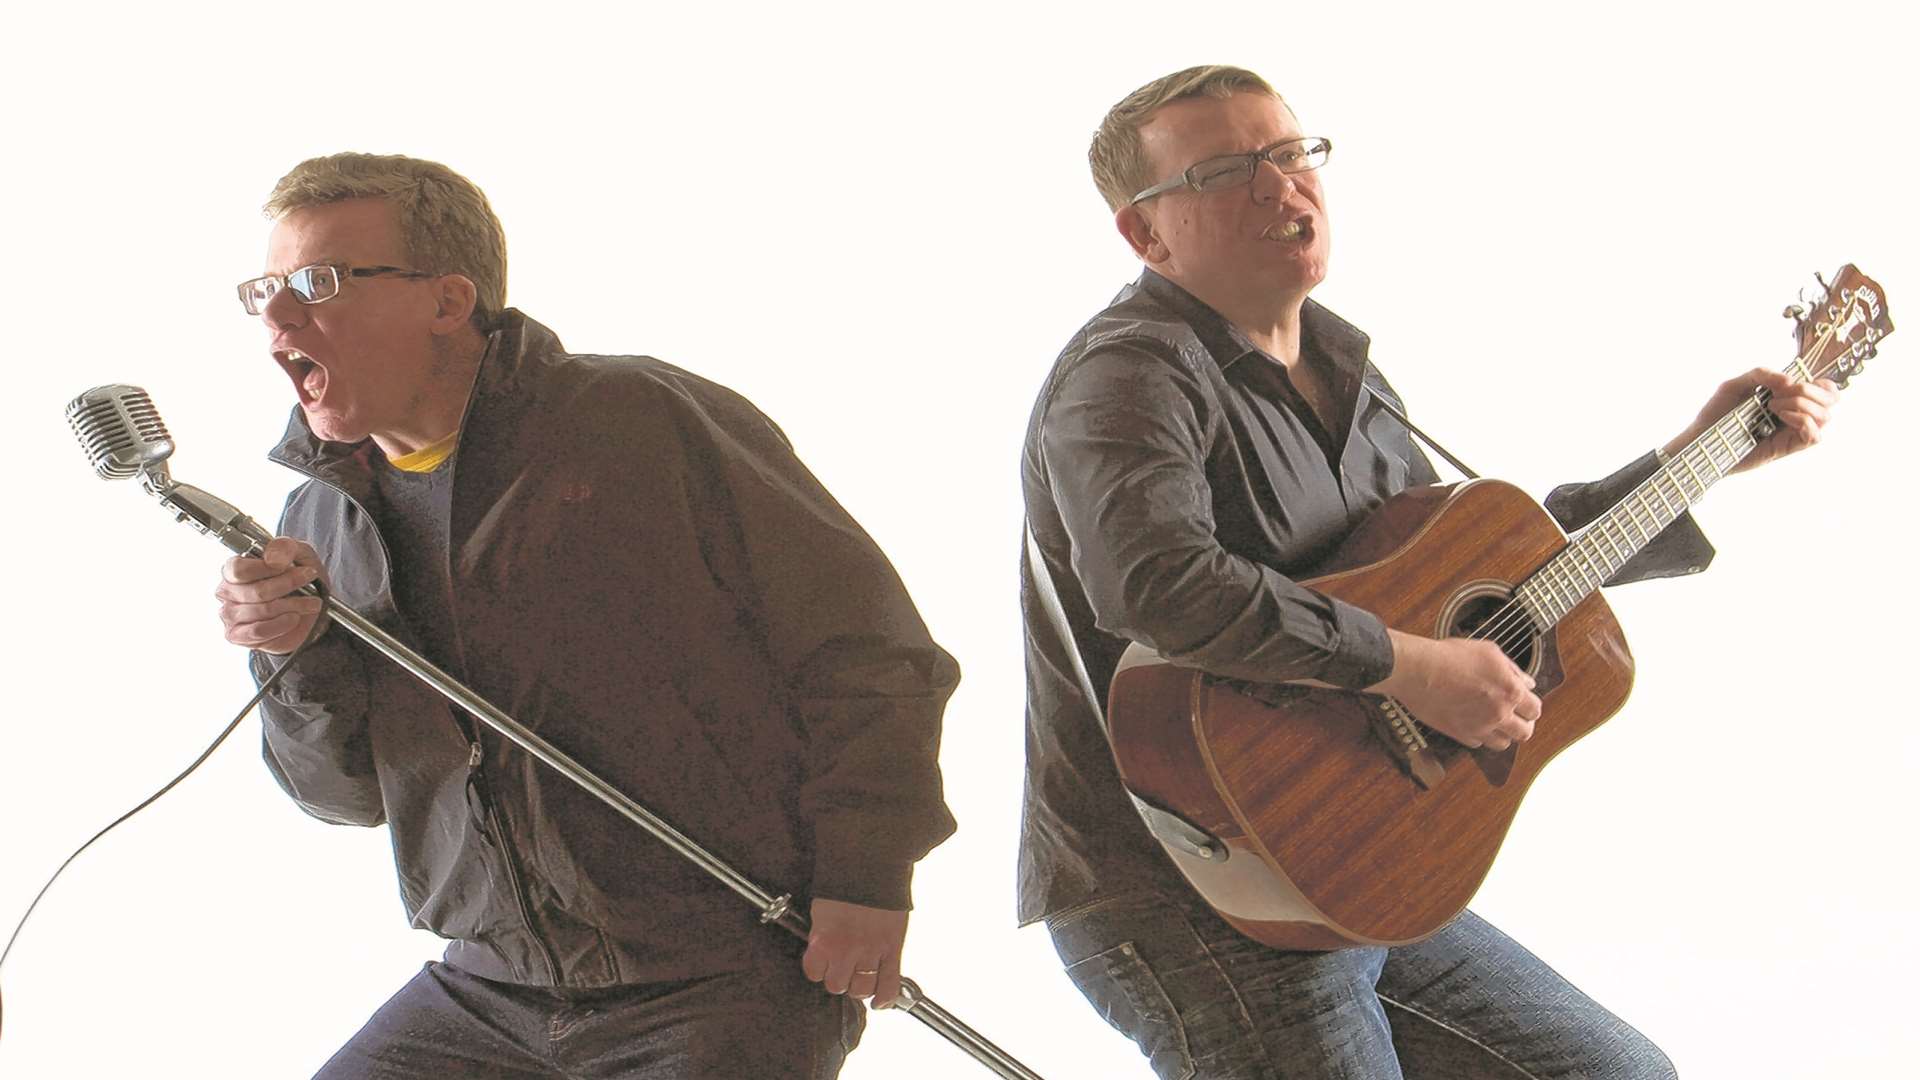 The Proclaimers have released 10 studio albums since 1987 as well as three compilation albums